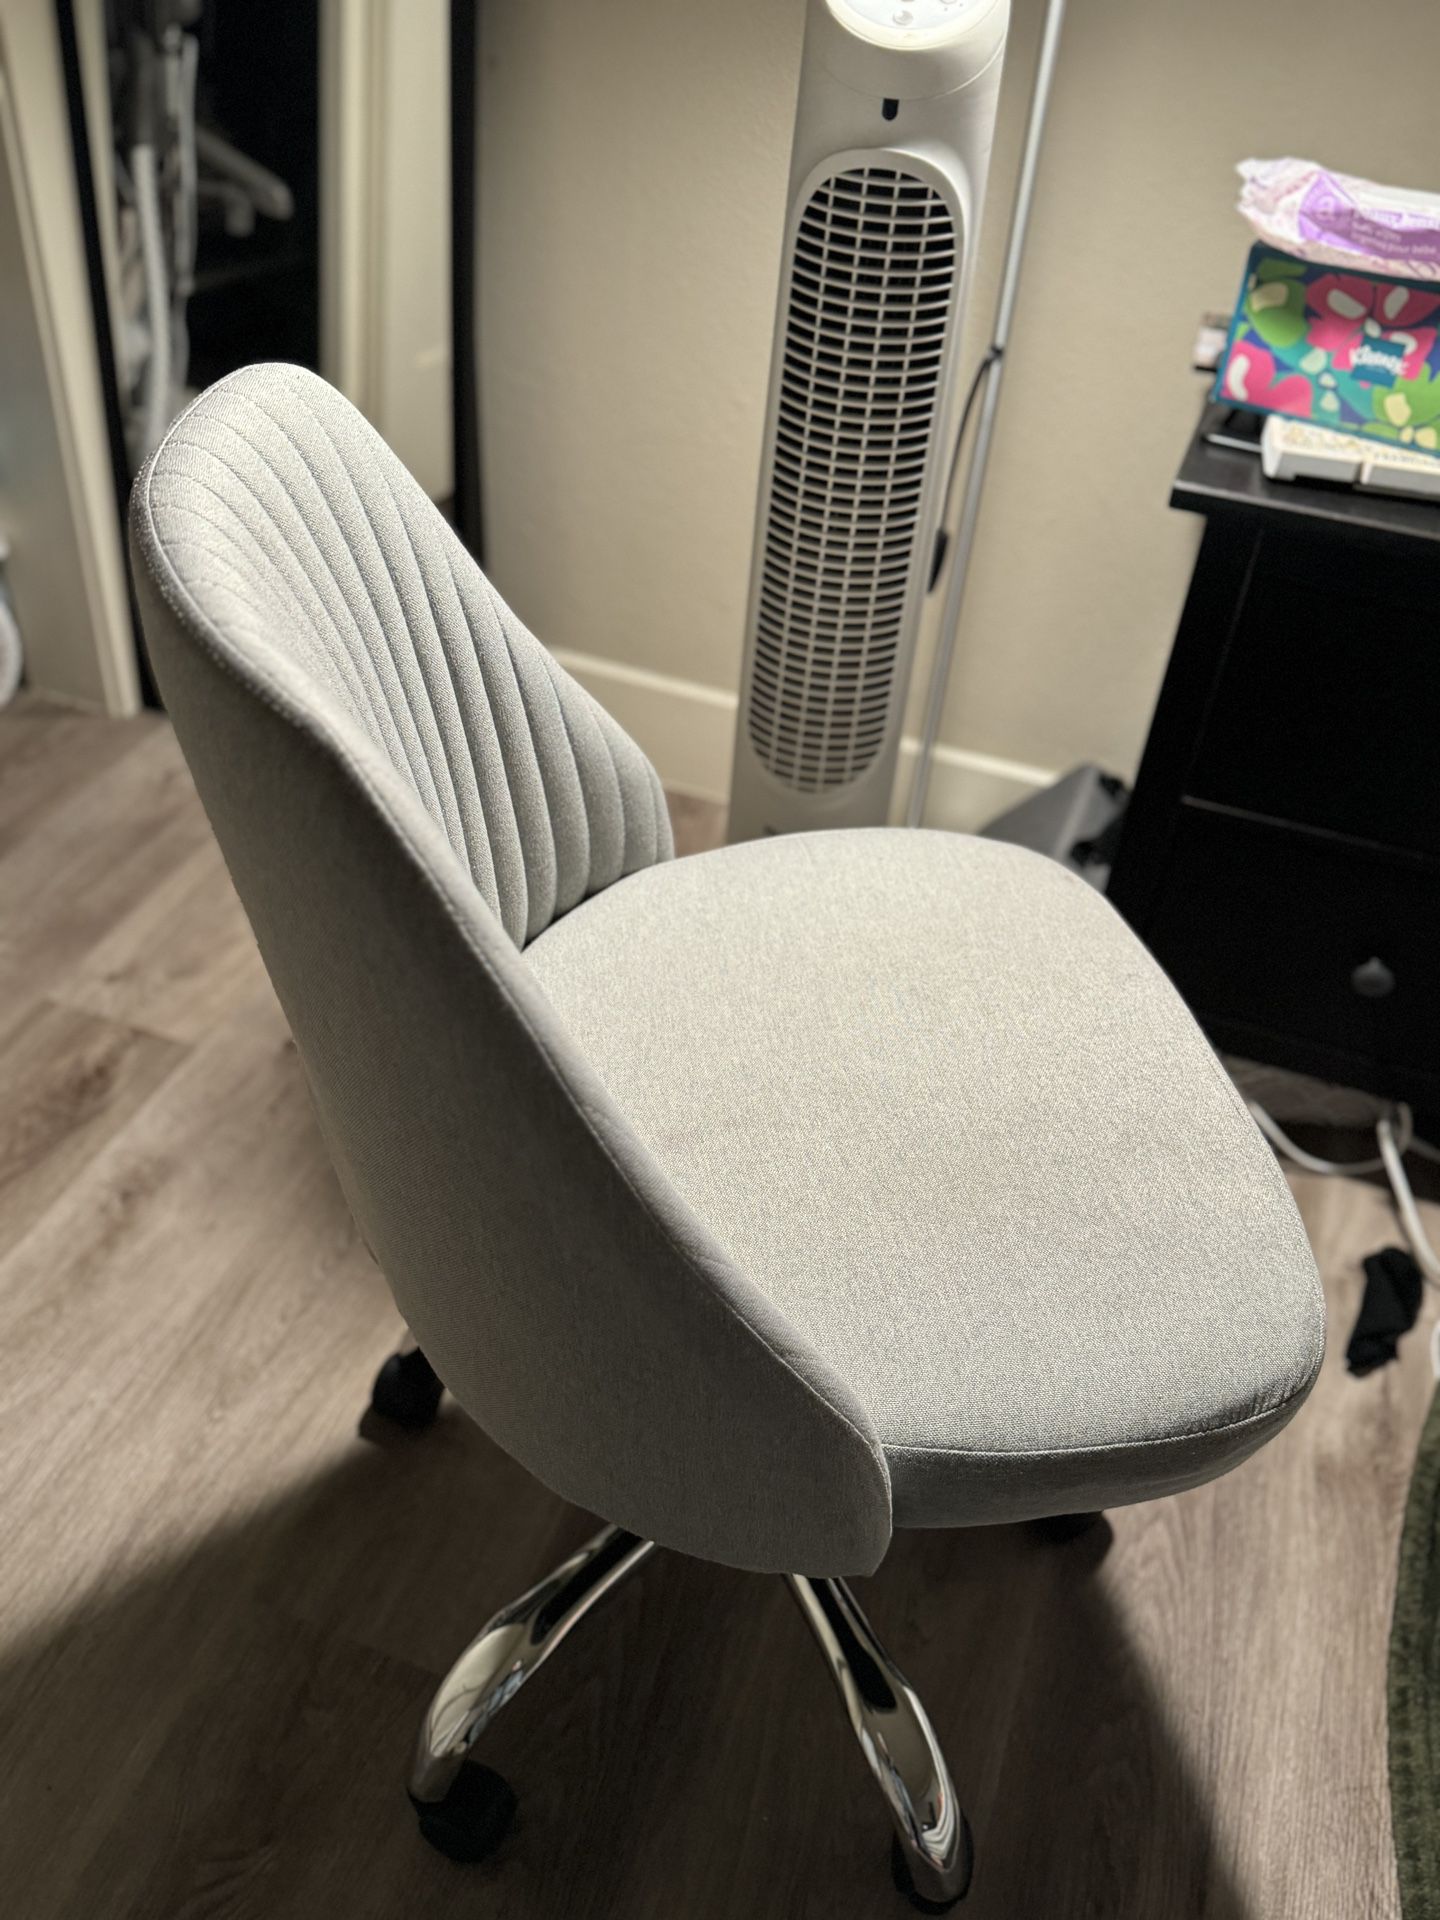 Adjustable chair (cover included)